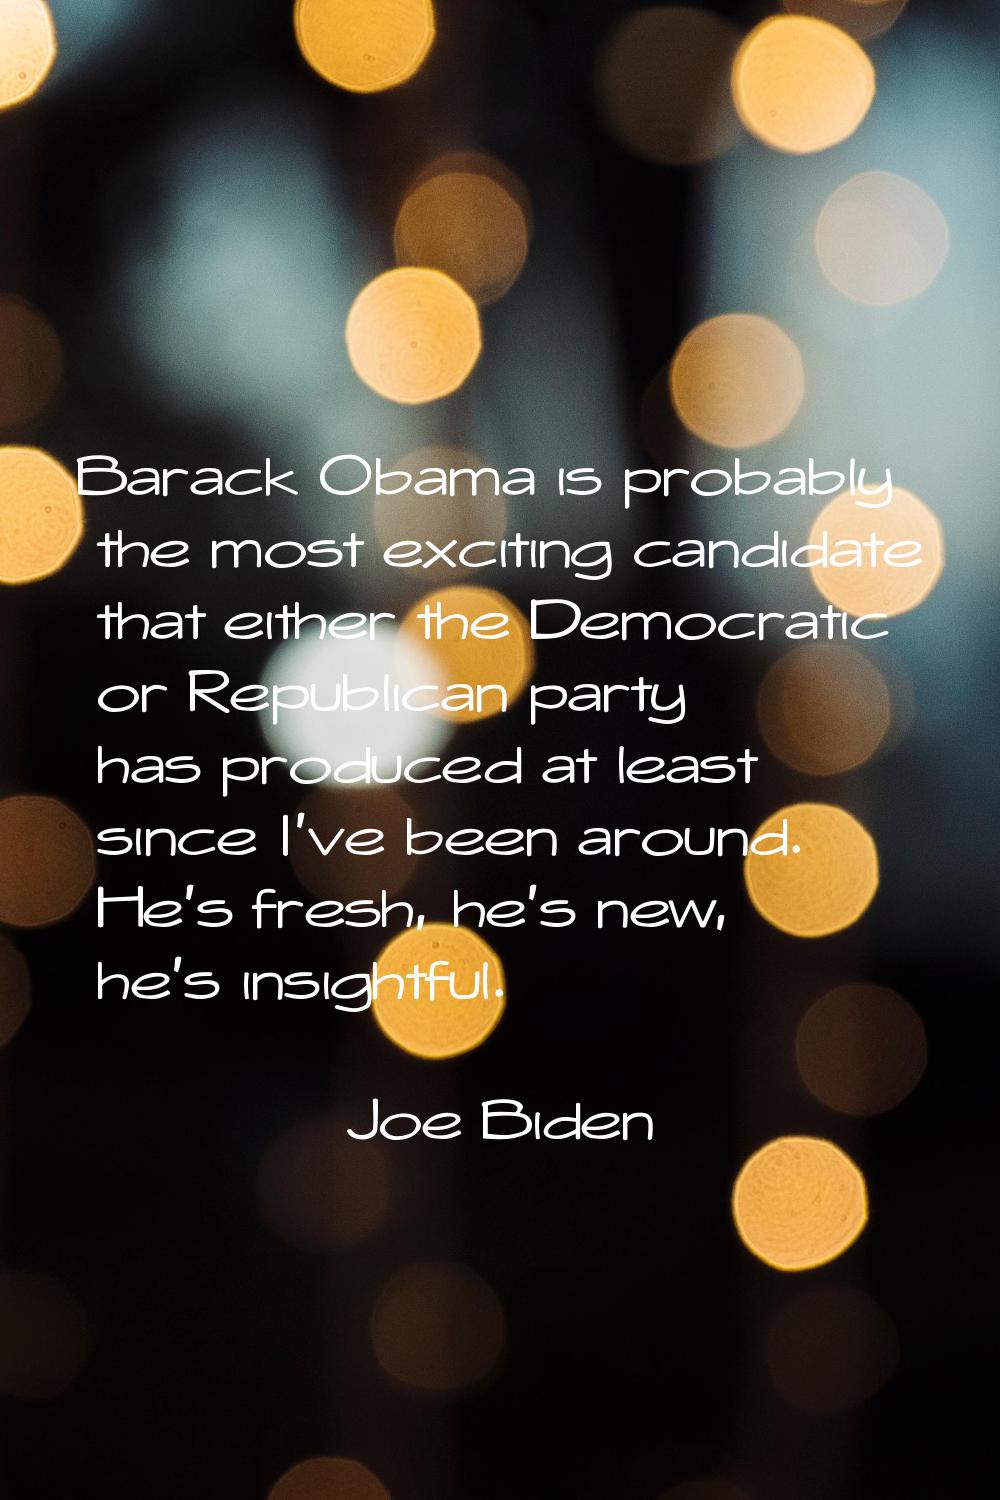 Barack Obama is probably the most exciting candidate that either the Democratic or Republican party